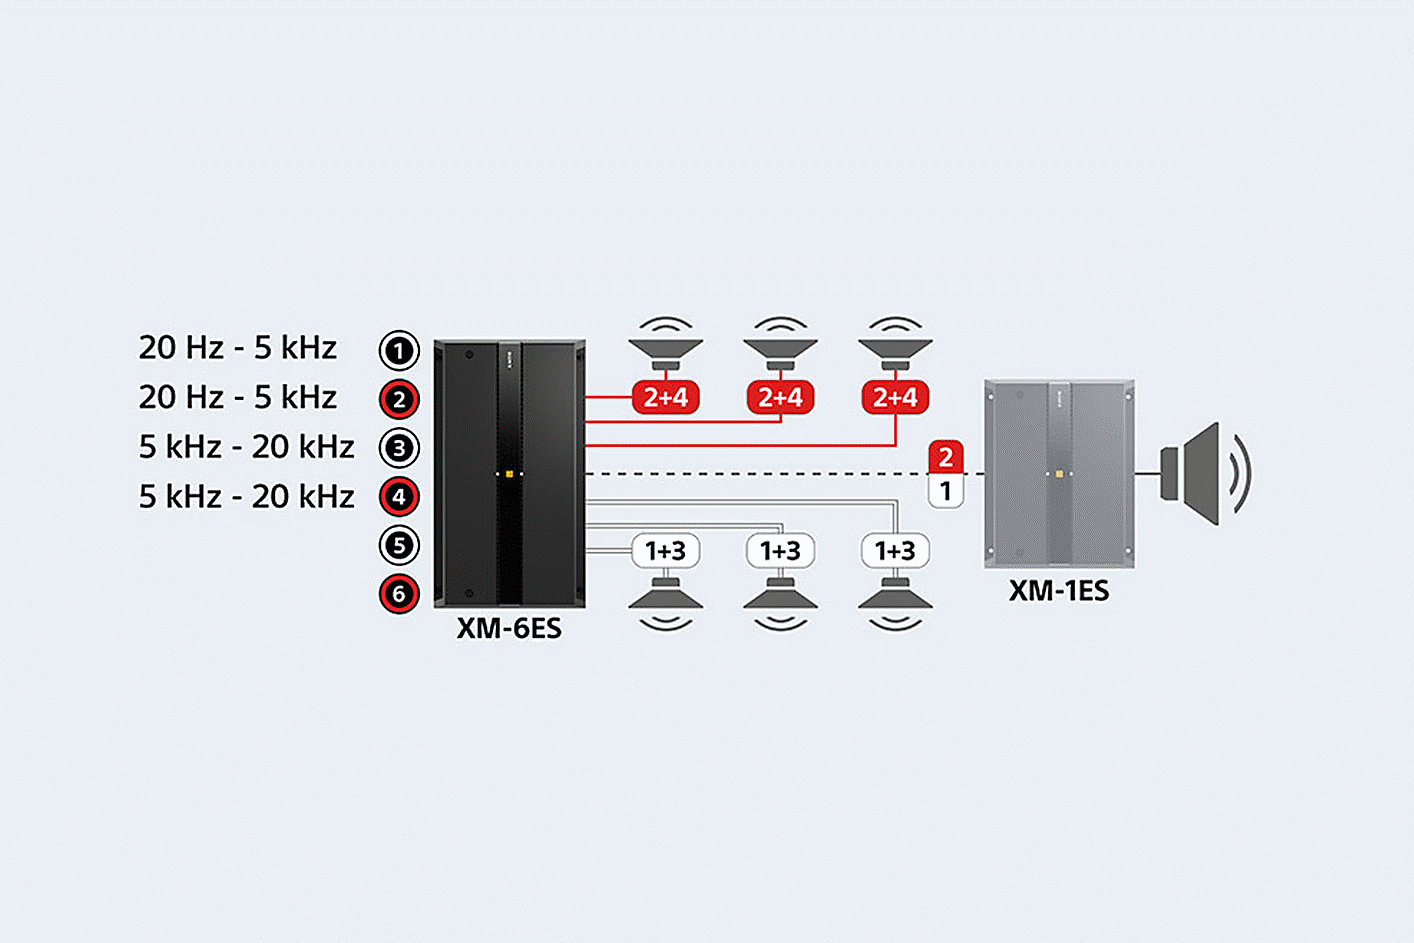 Diagram of the XM-6ES connected to six speakers and a XM-1ES, sound settings are displayed next to ports 1, 2, 3 and 4